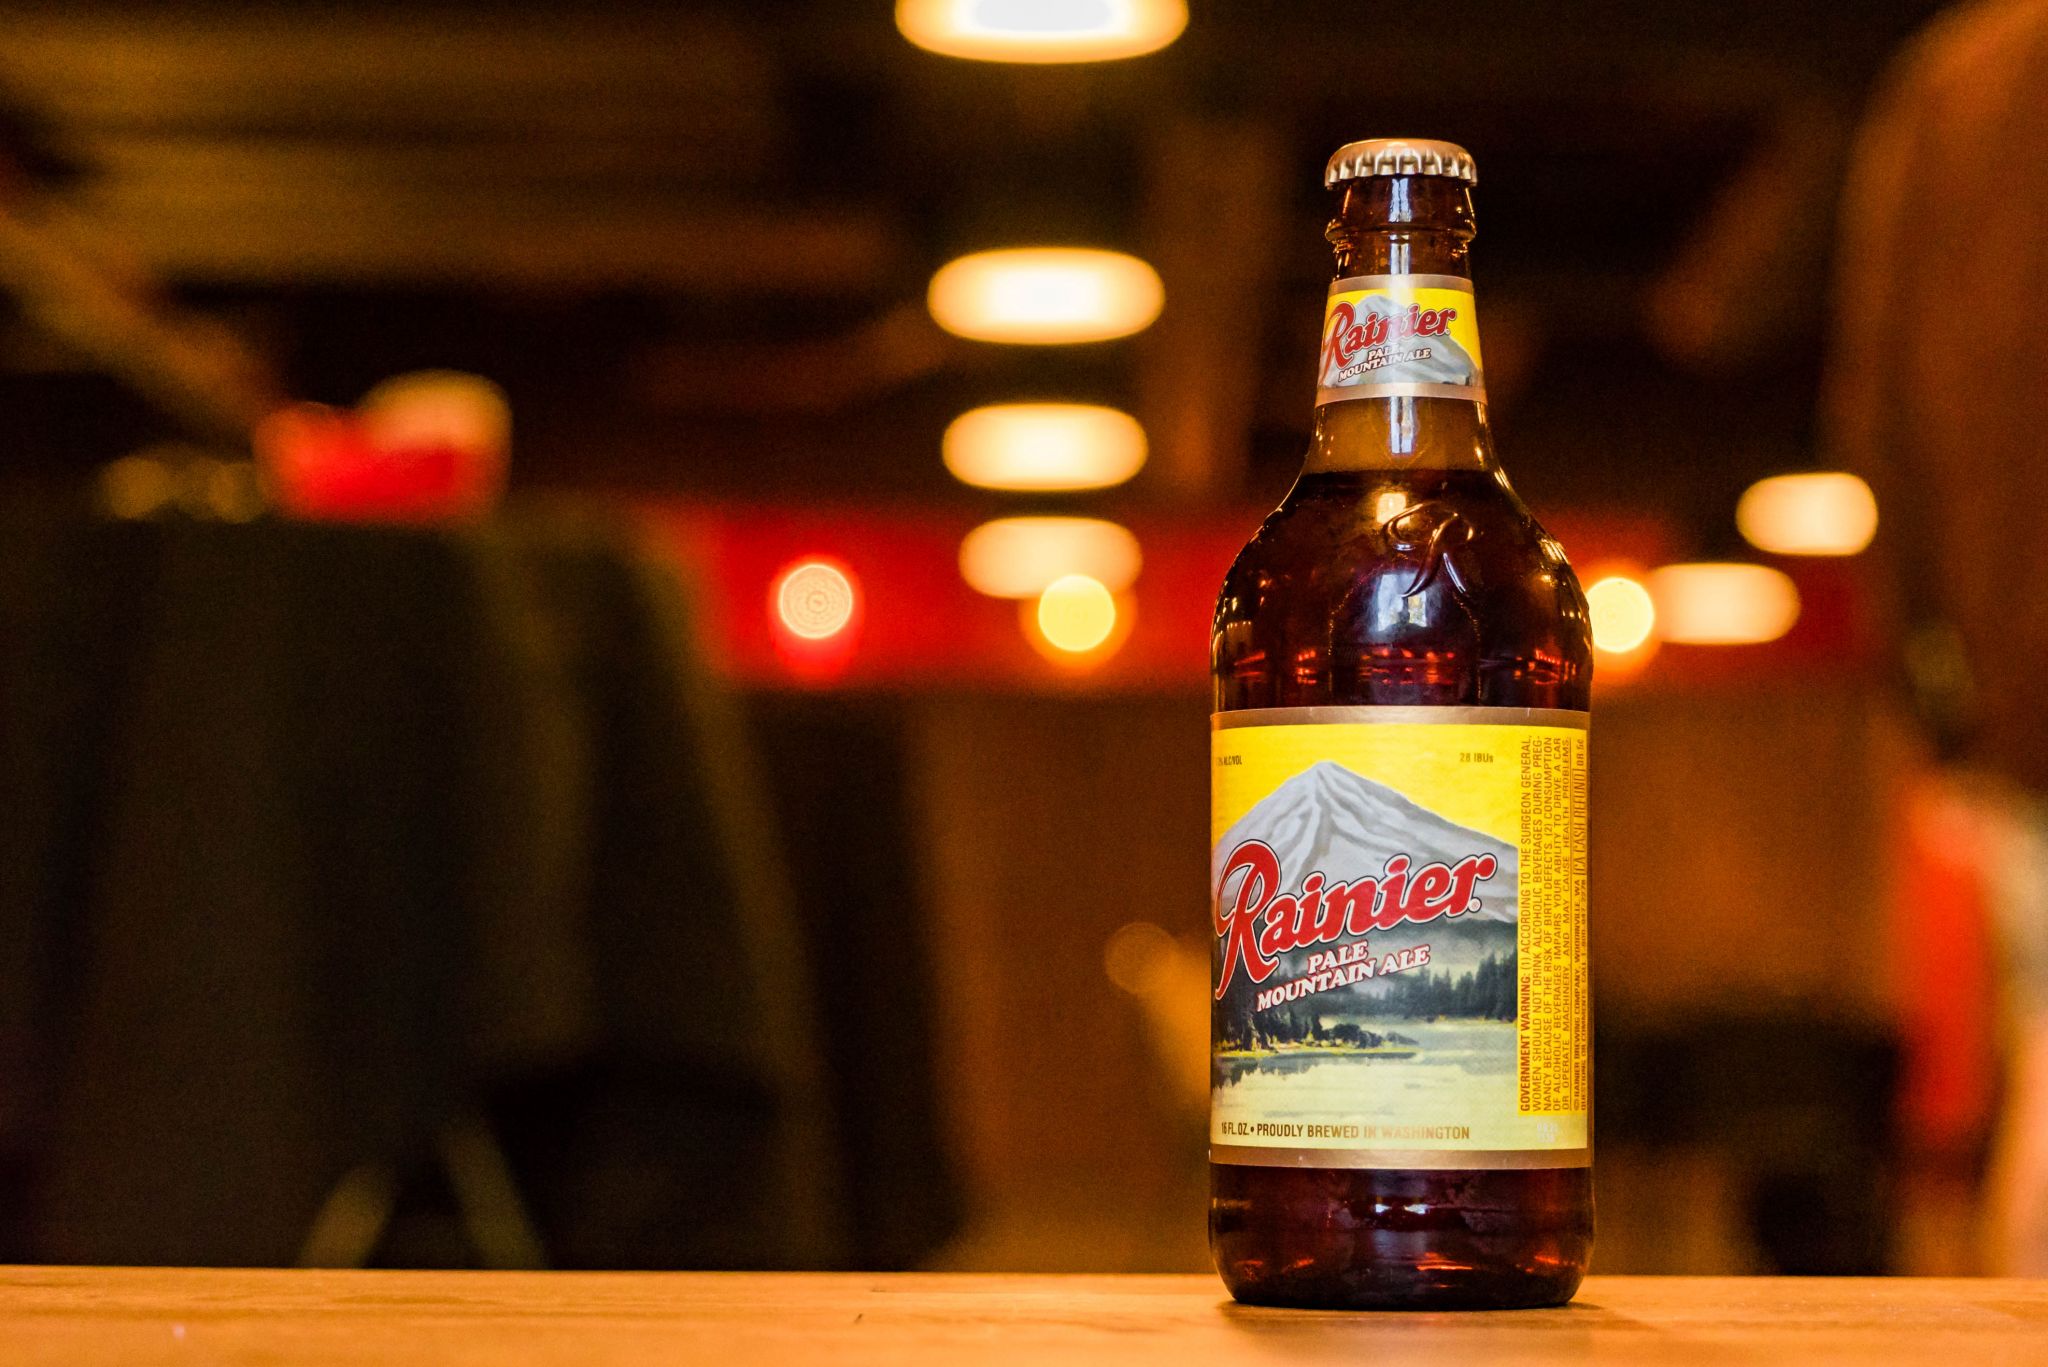 Rainier's first new beer in 20 years to be on sale this week